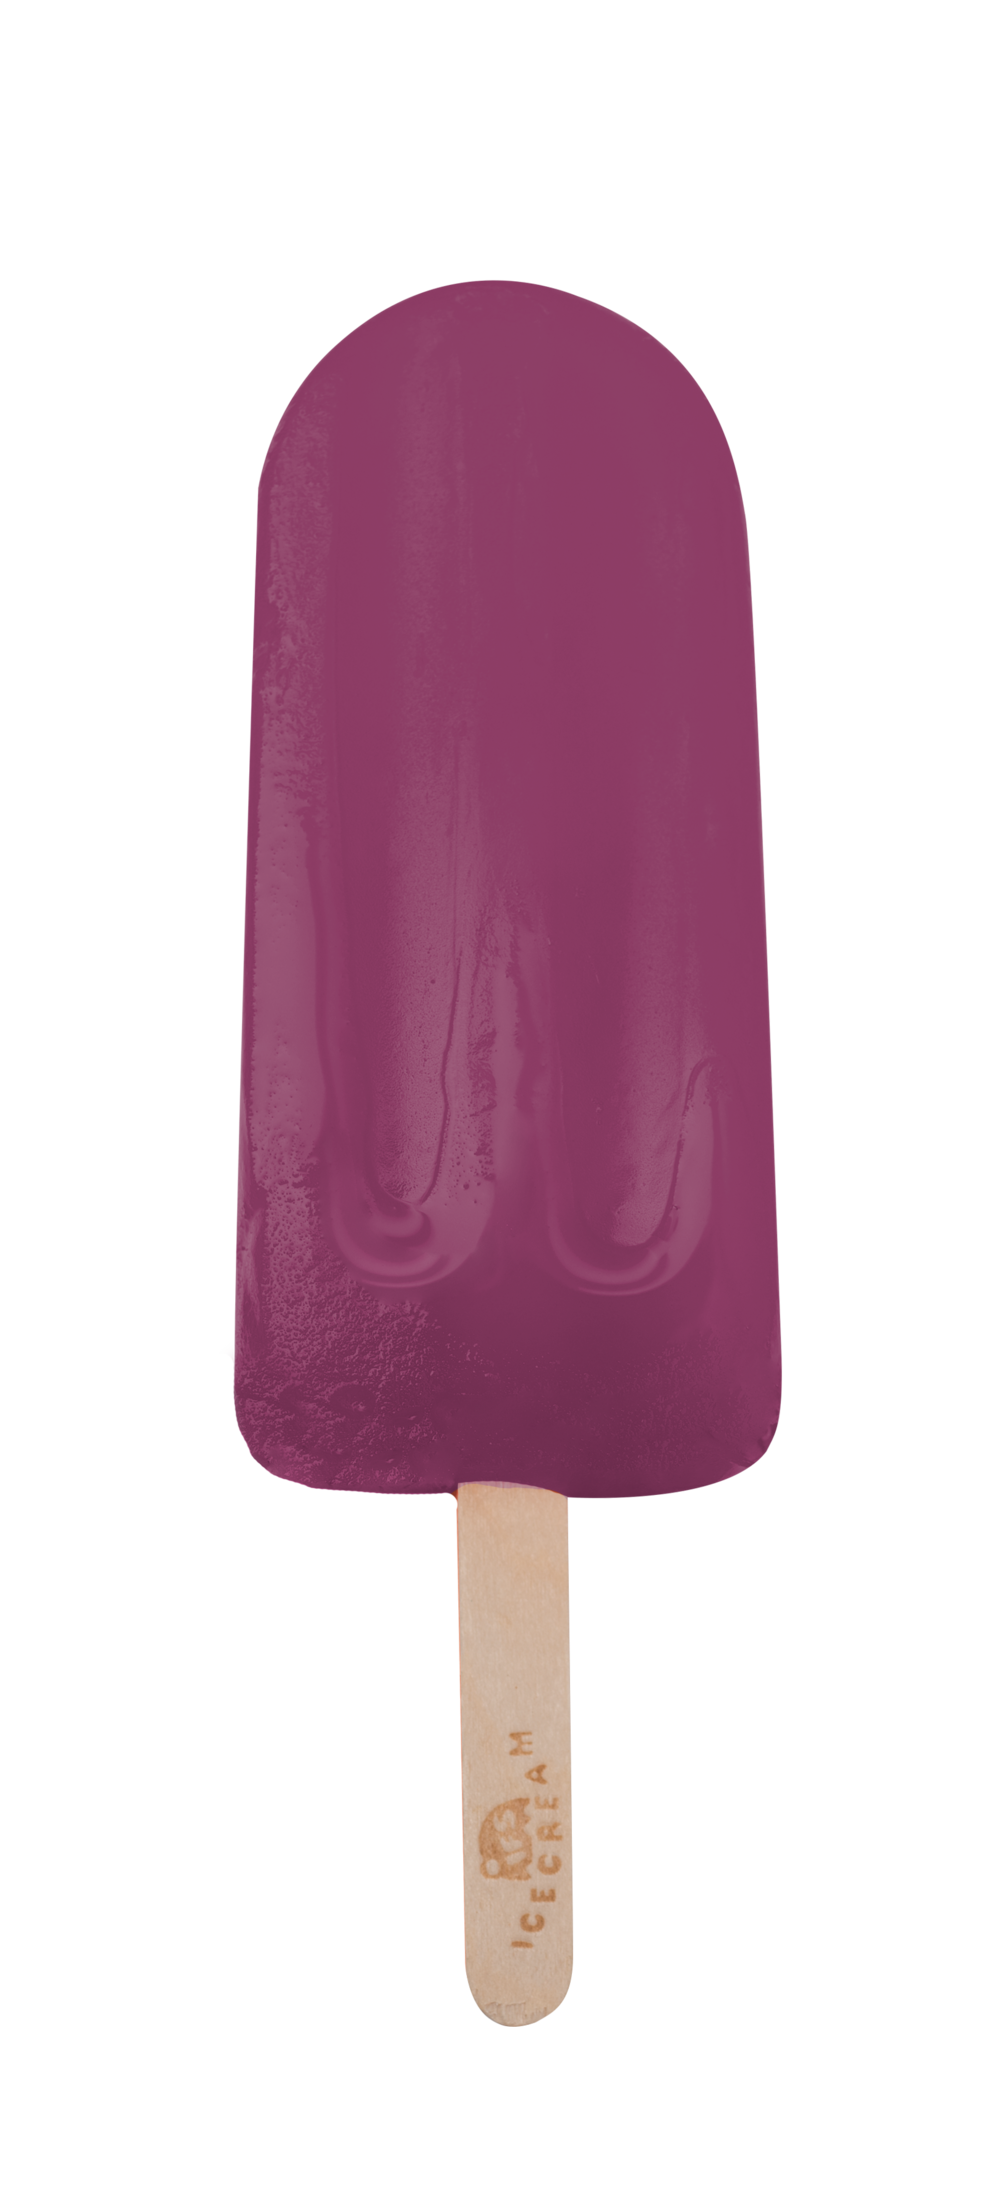 Sweet Ice Pop PNG Free Download